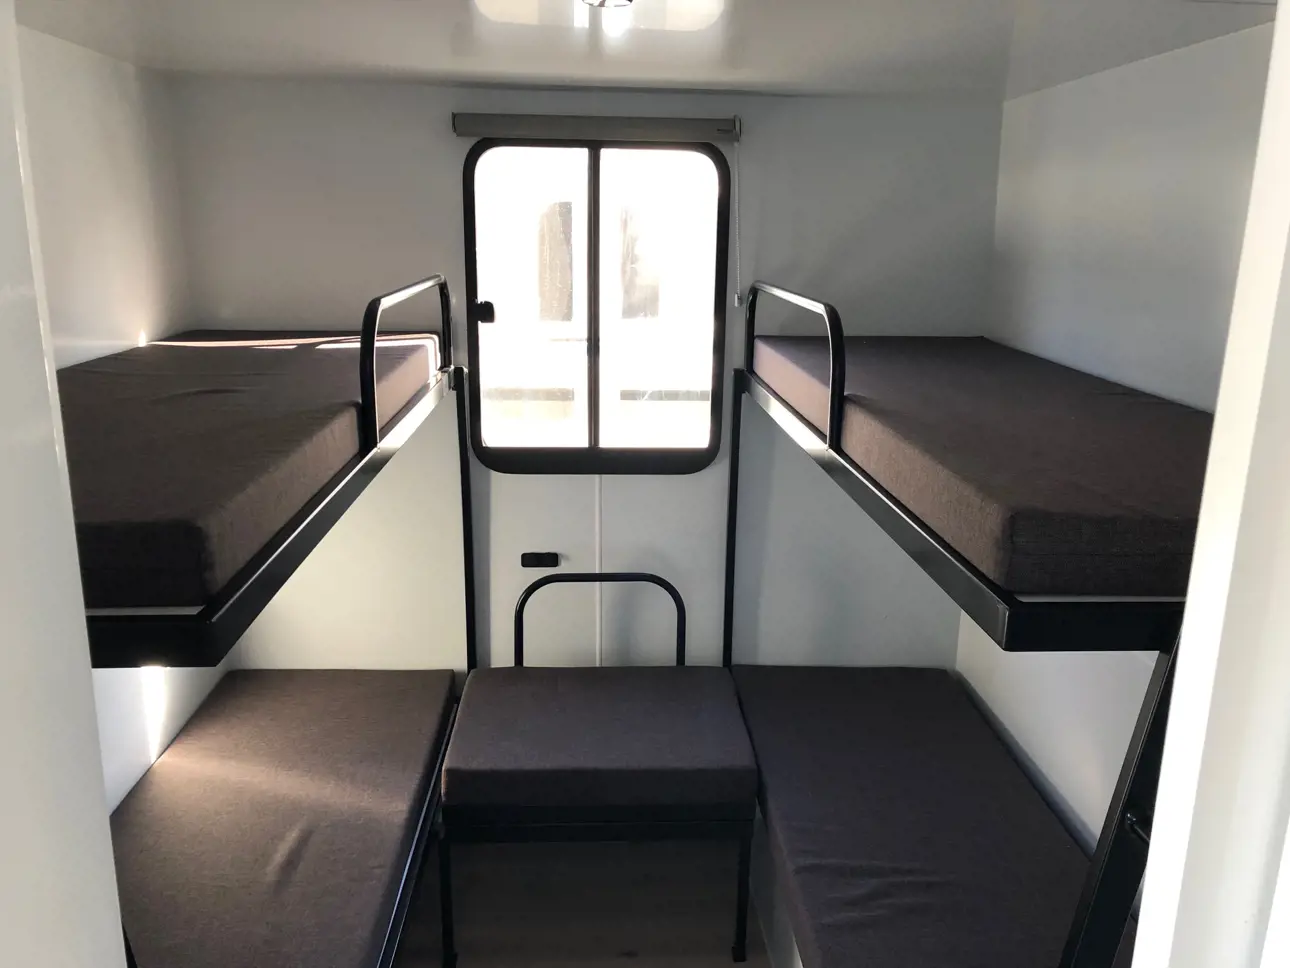 2 spacious bedrooms with 4 single bunks in each